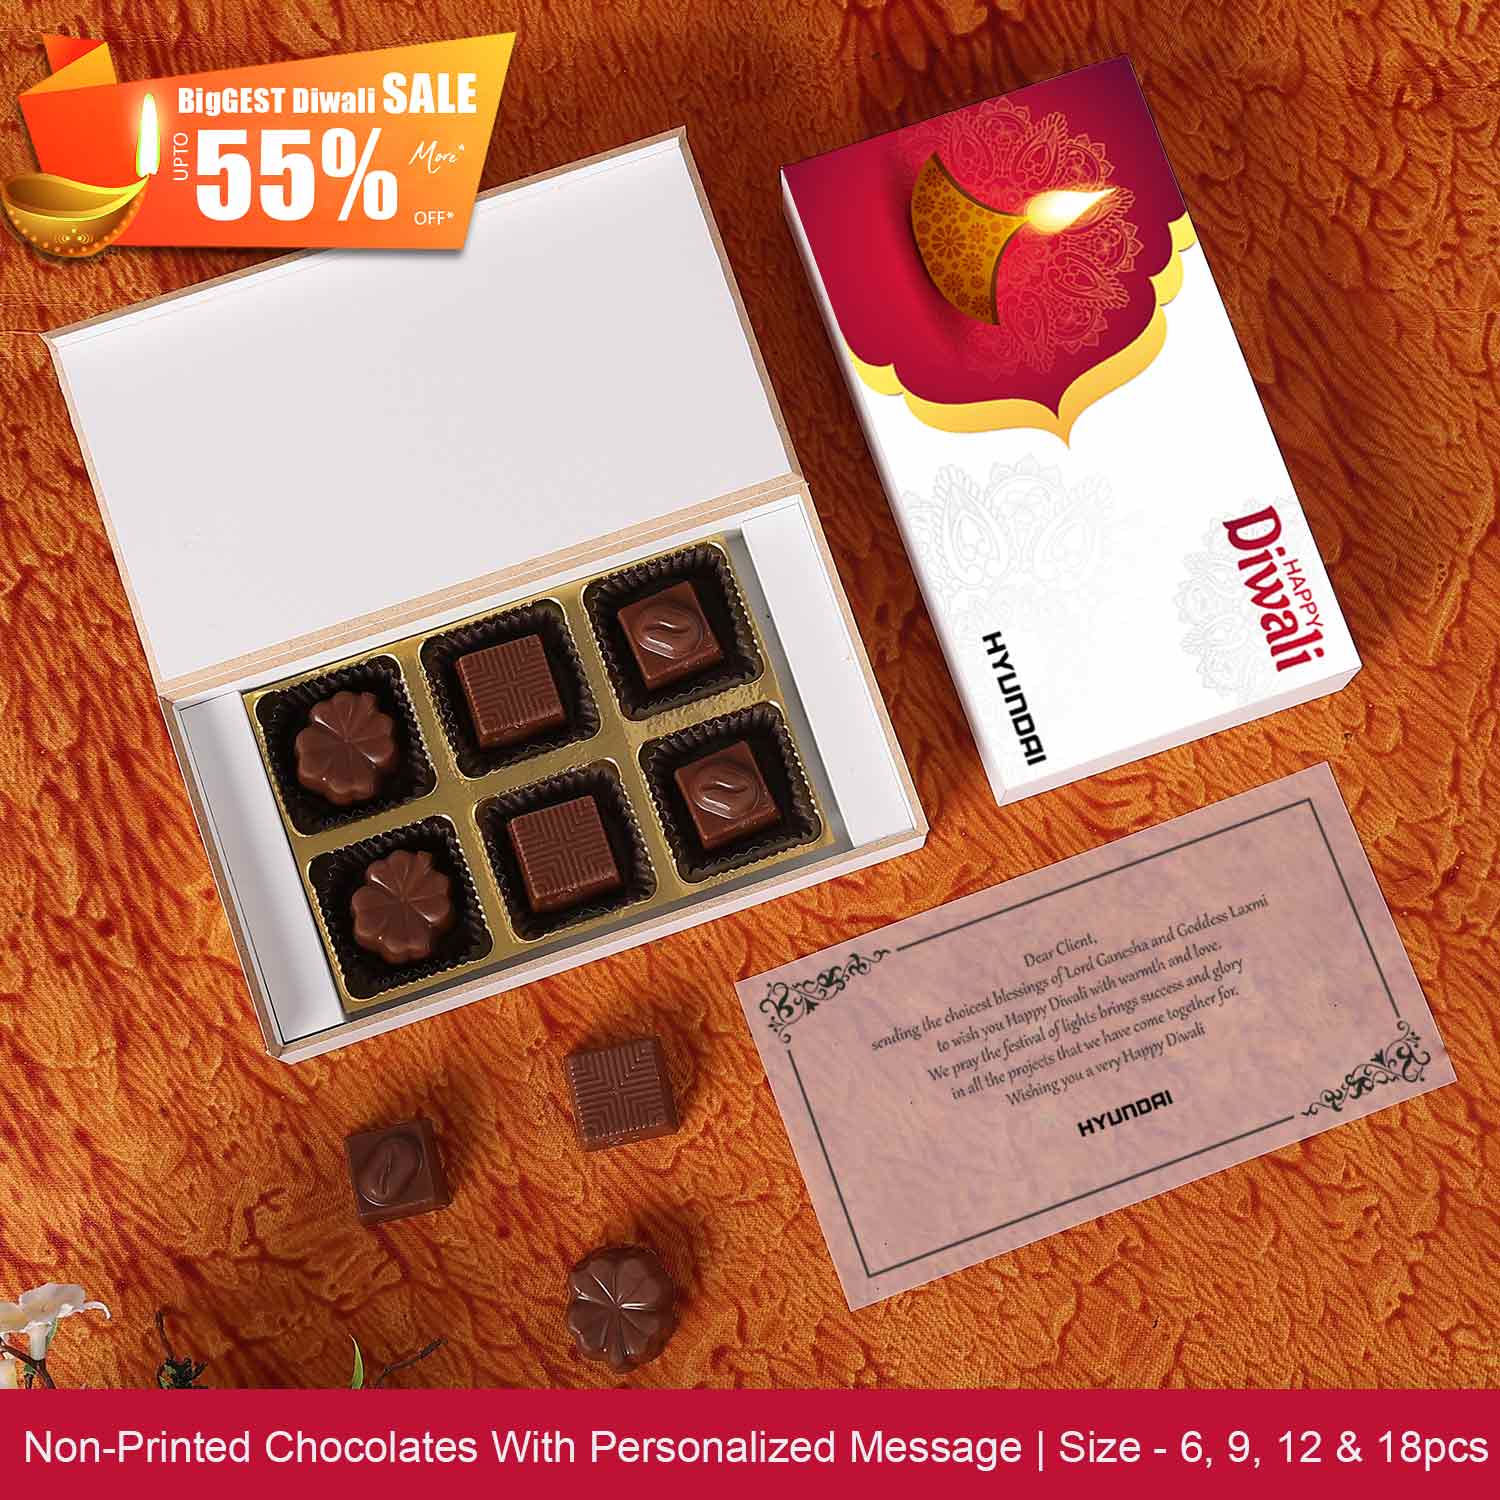 Top Corporate gifting companies in india  customized corporate gifts banglore corporate gifts fot employees Customised chocolates near me Personalized chocolate for birthdays